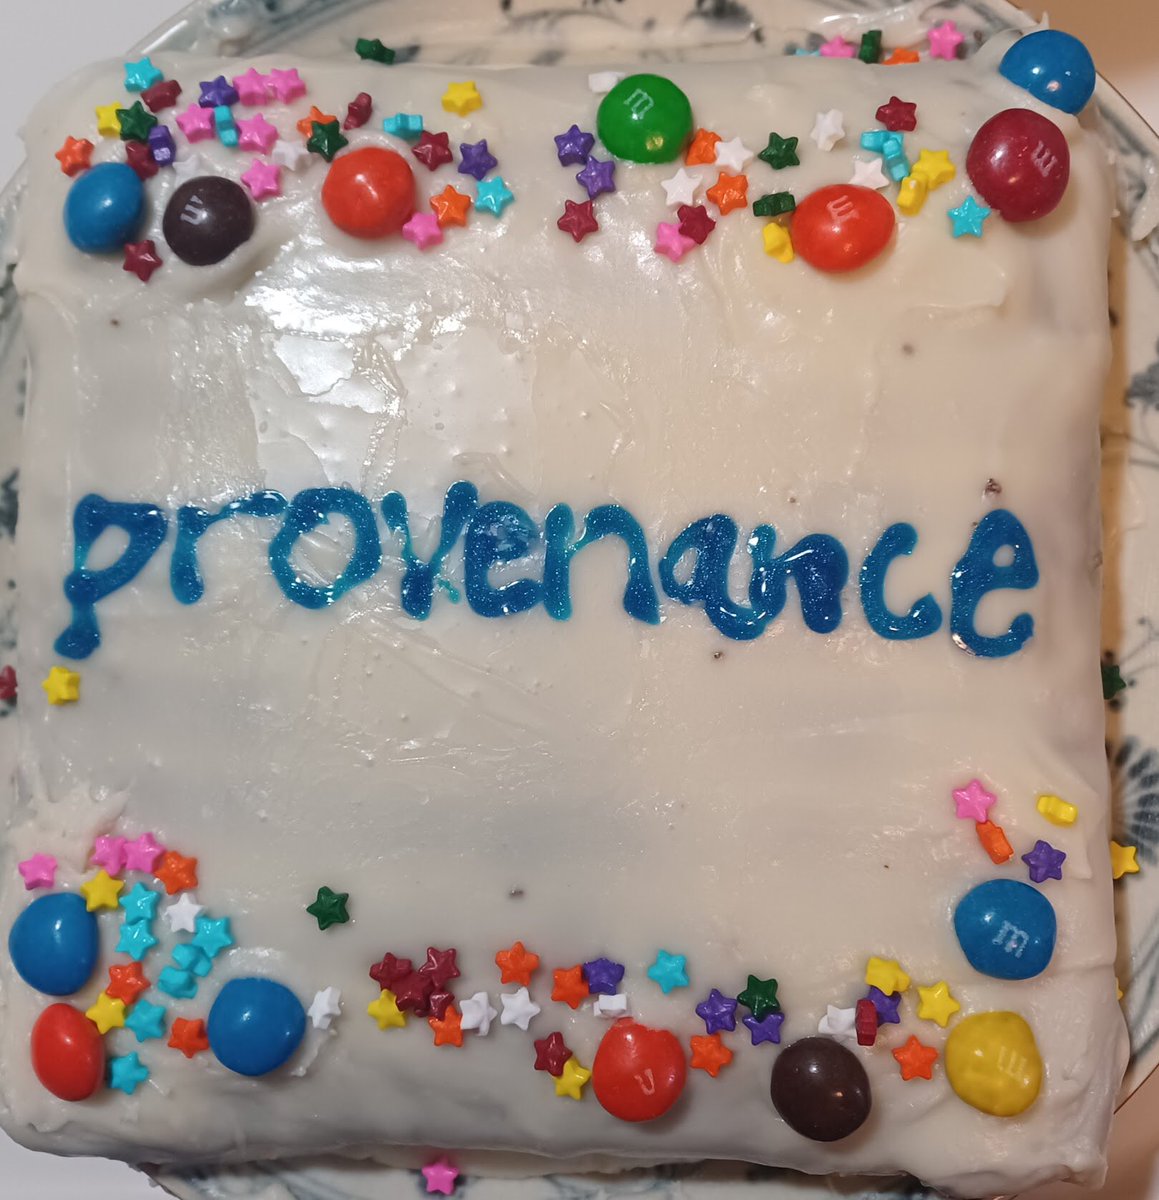 A happy International Provenance Research Day to all! I realized have no social media content to post this year, so I finally made my cake. 🙃 #tagderprovenienzforschung #dayofprovenanceresearch